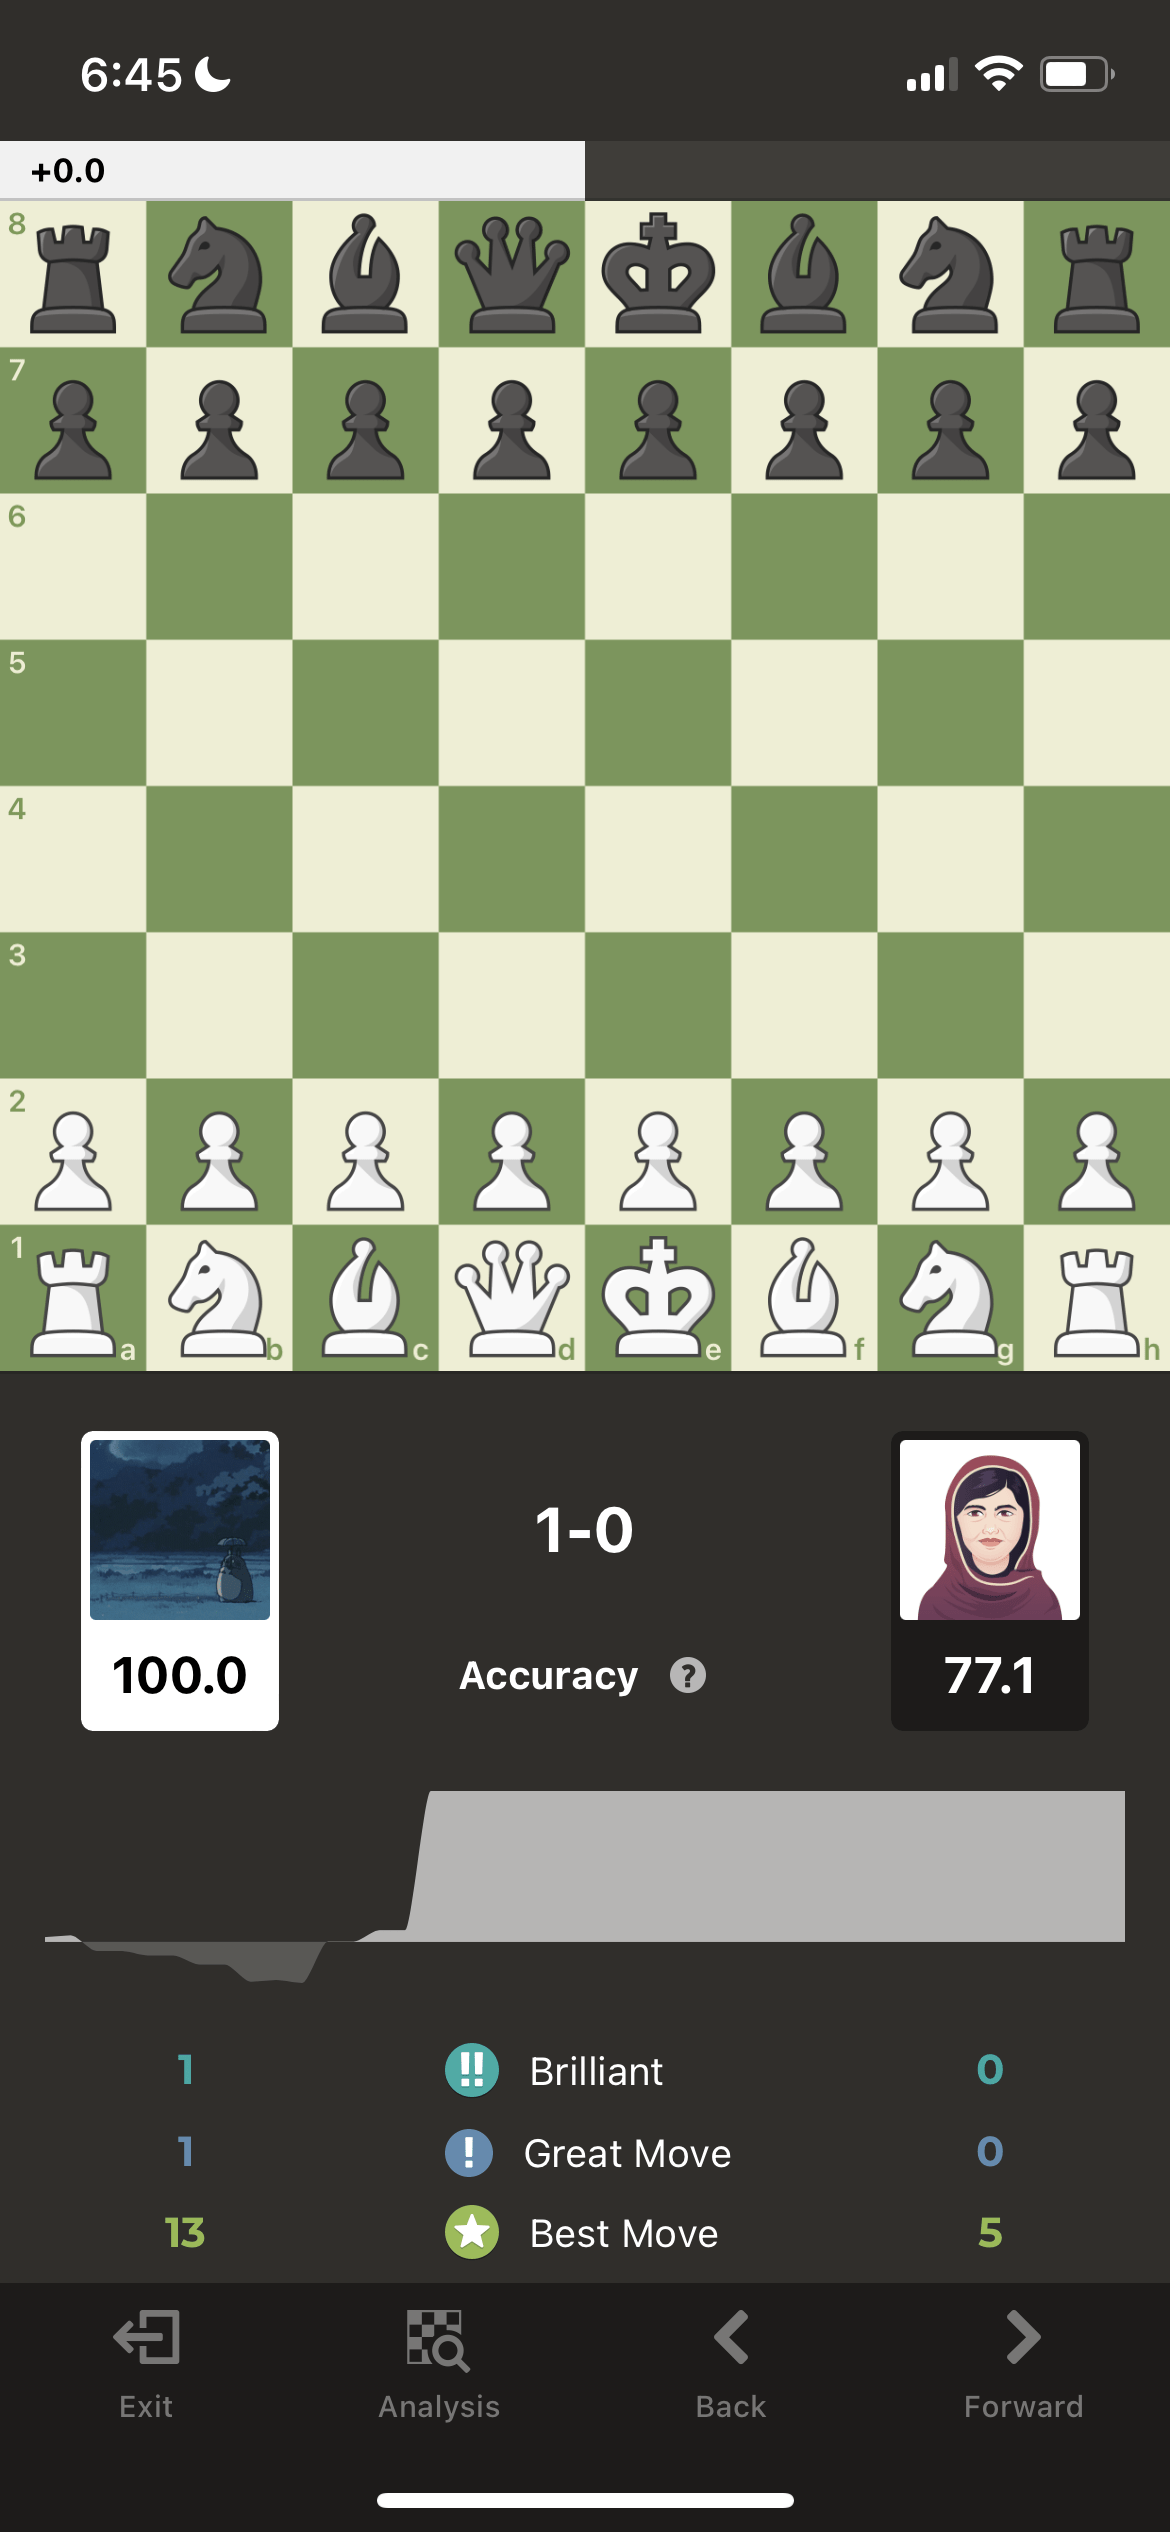 Game Analysis Not Giving Accuracy Percentages For this Game - Chess Forums  